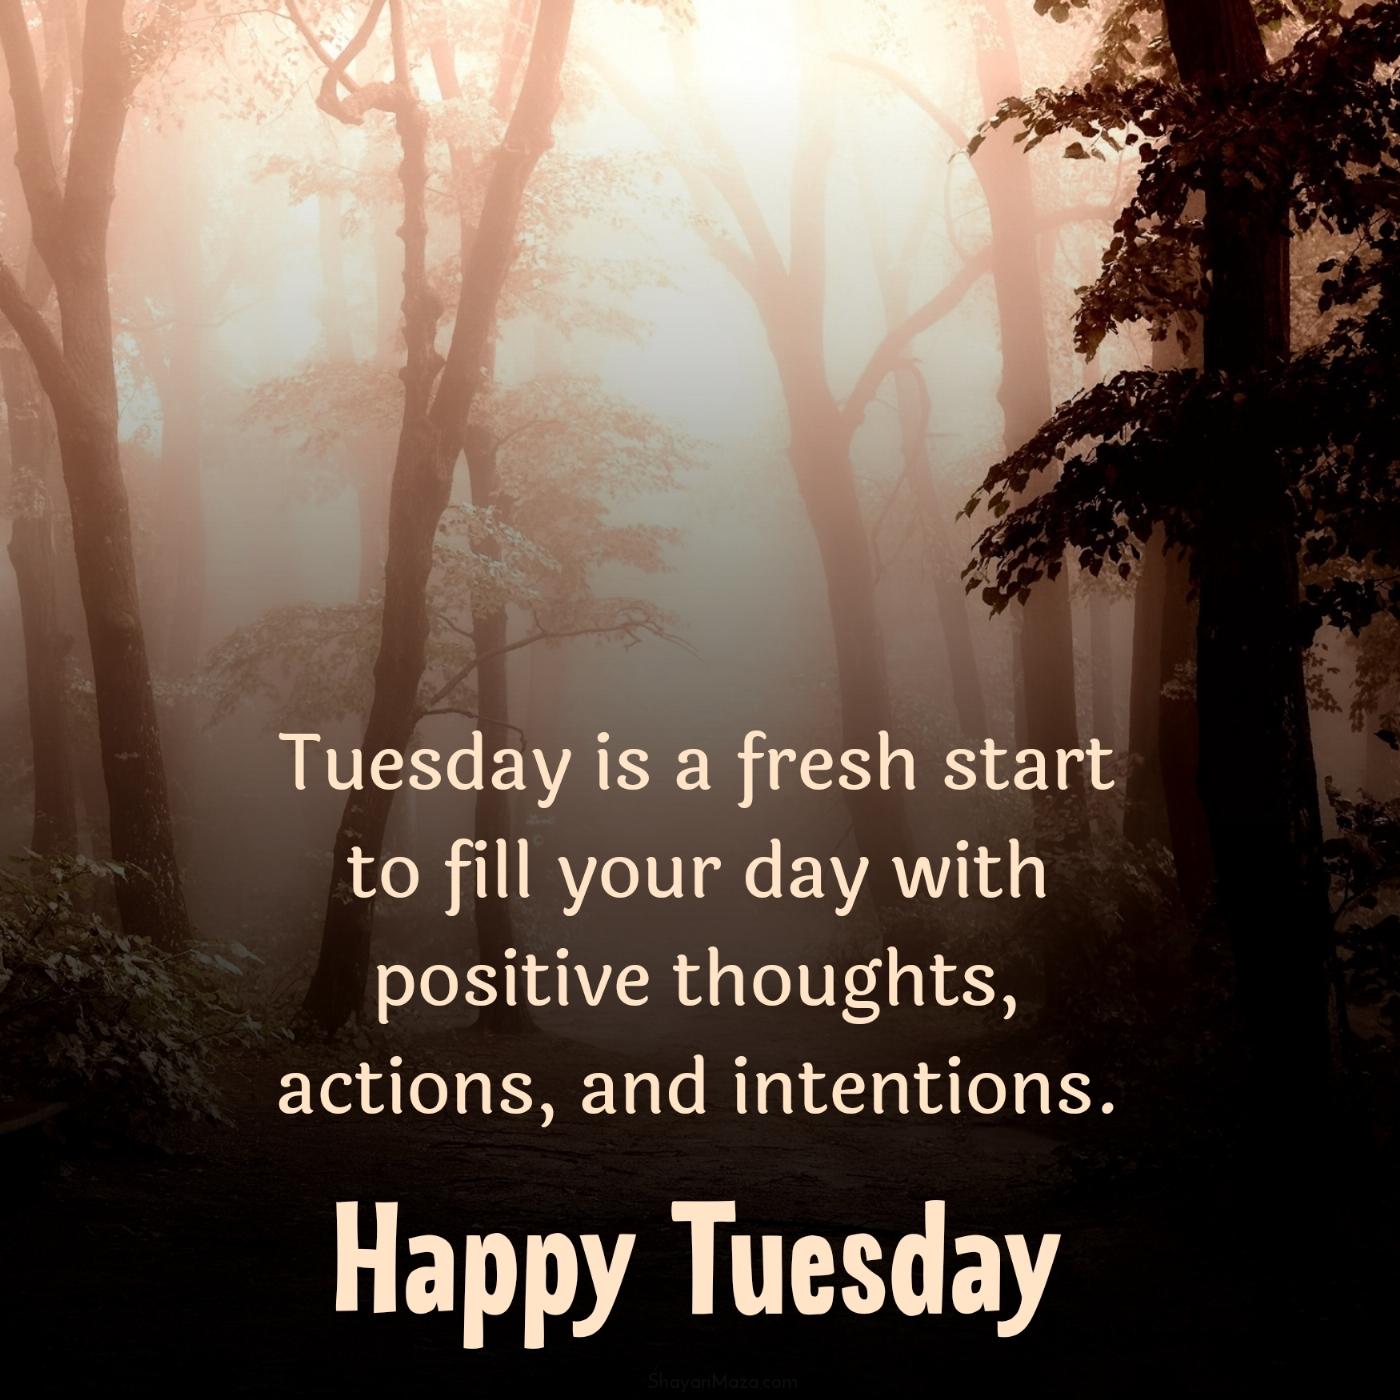 Tuesday is a fresh start to fill your day with positive thoughts